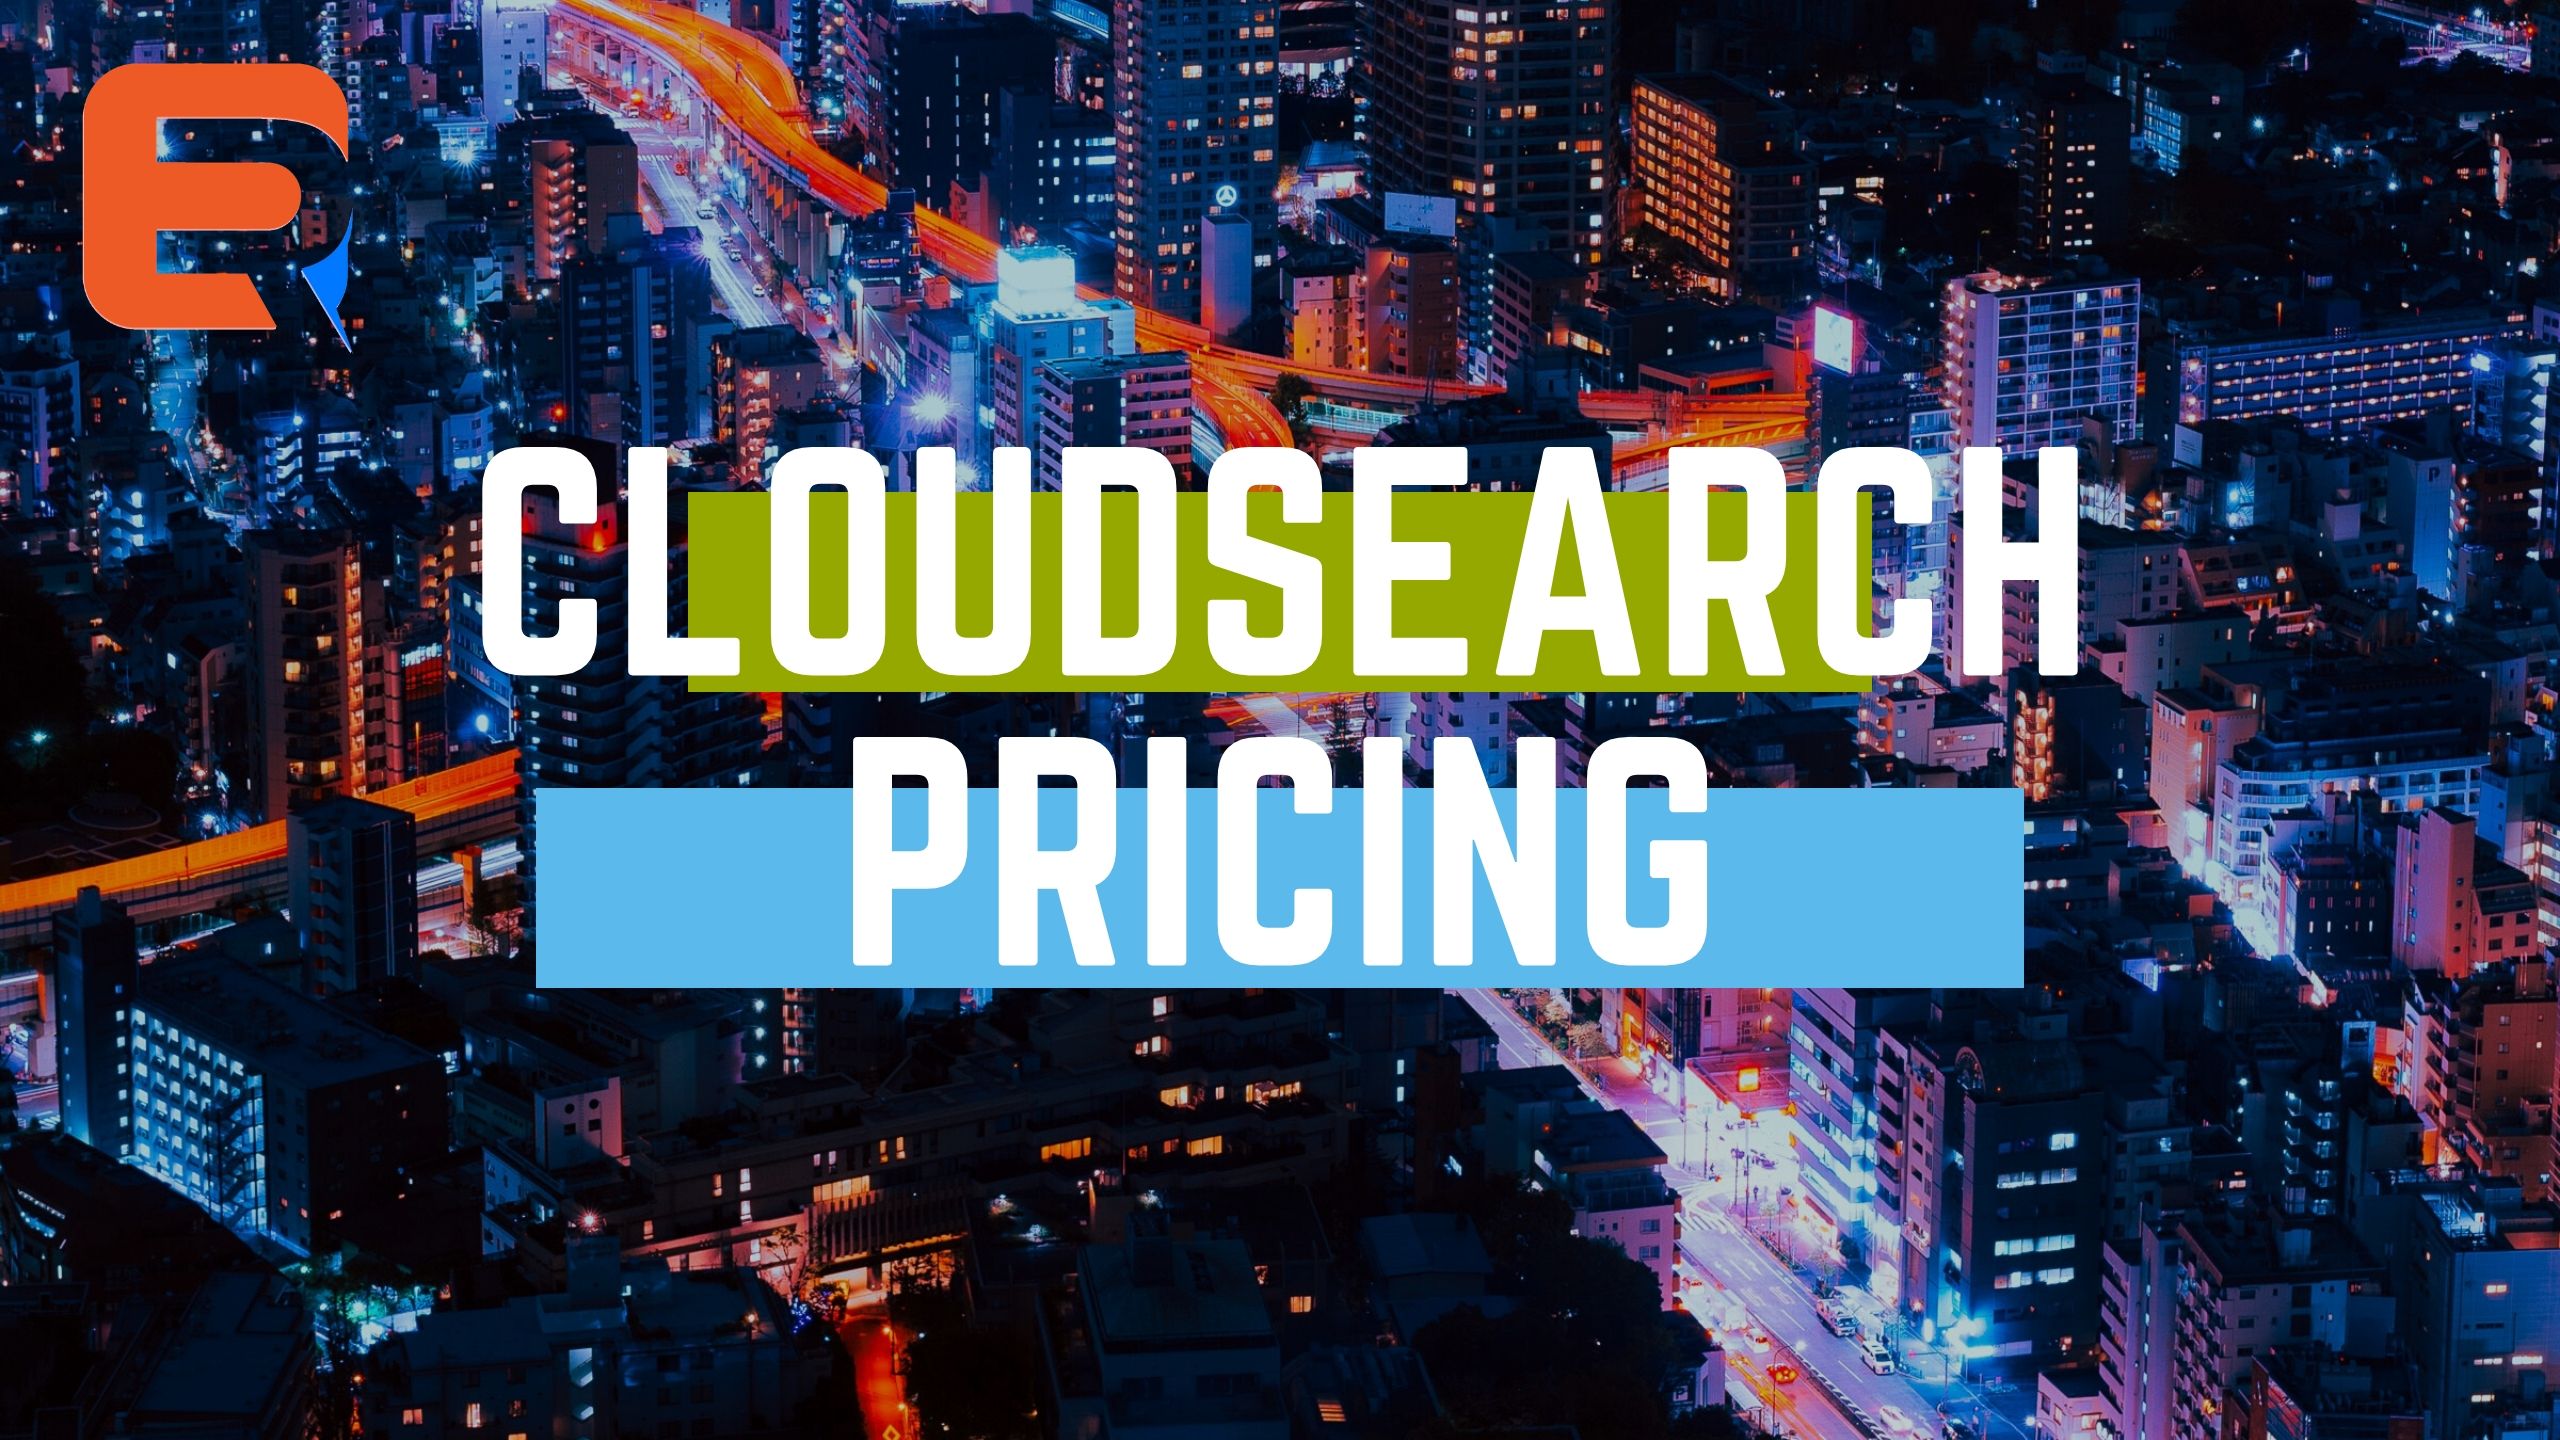 Cloudsearch pricing